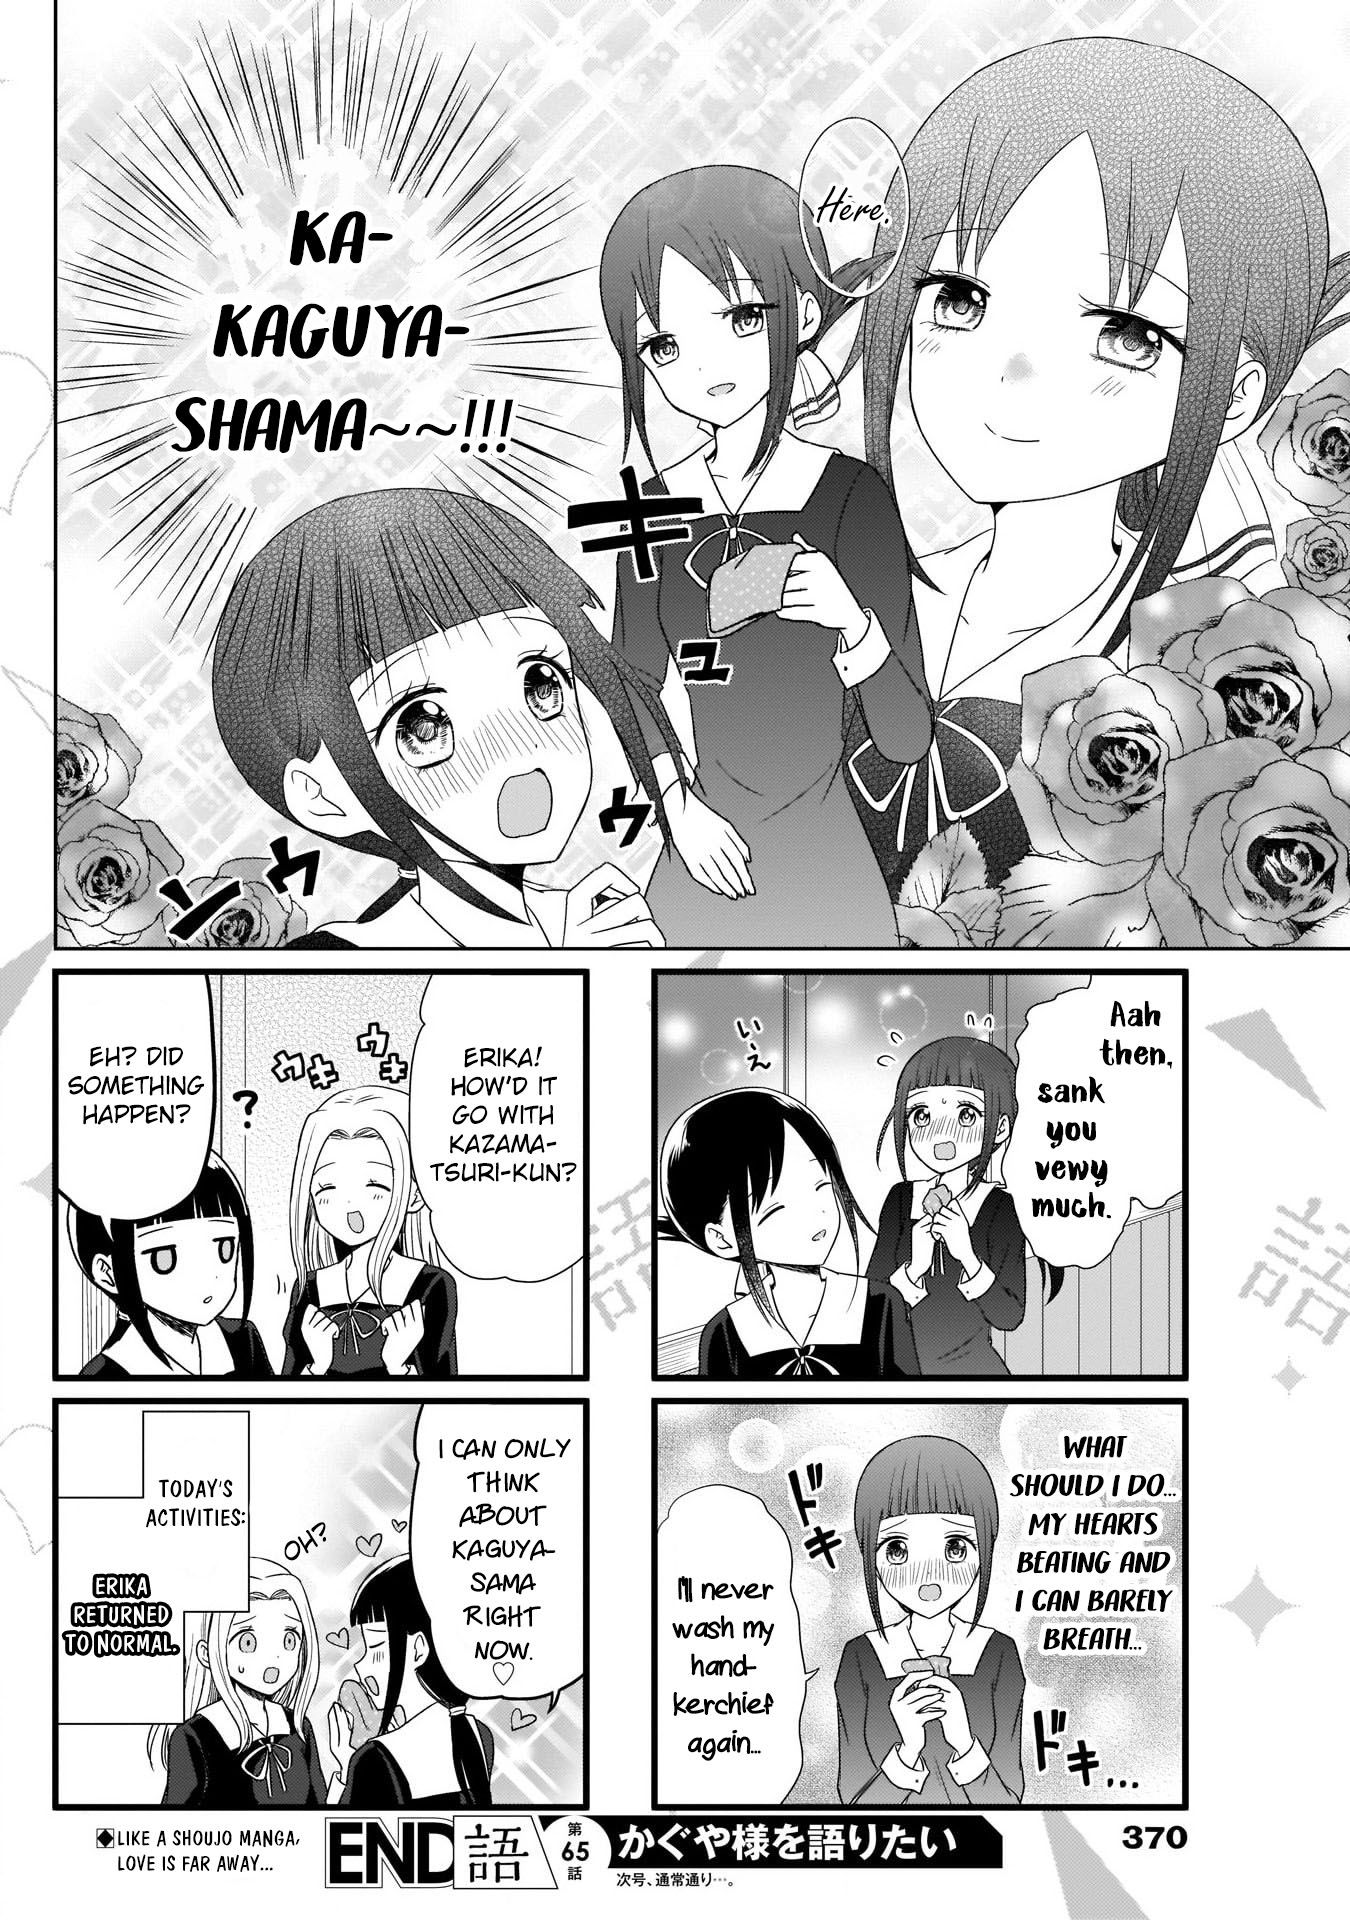 We Want To Talk About Kaguya 65 5